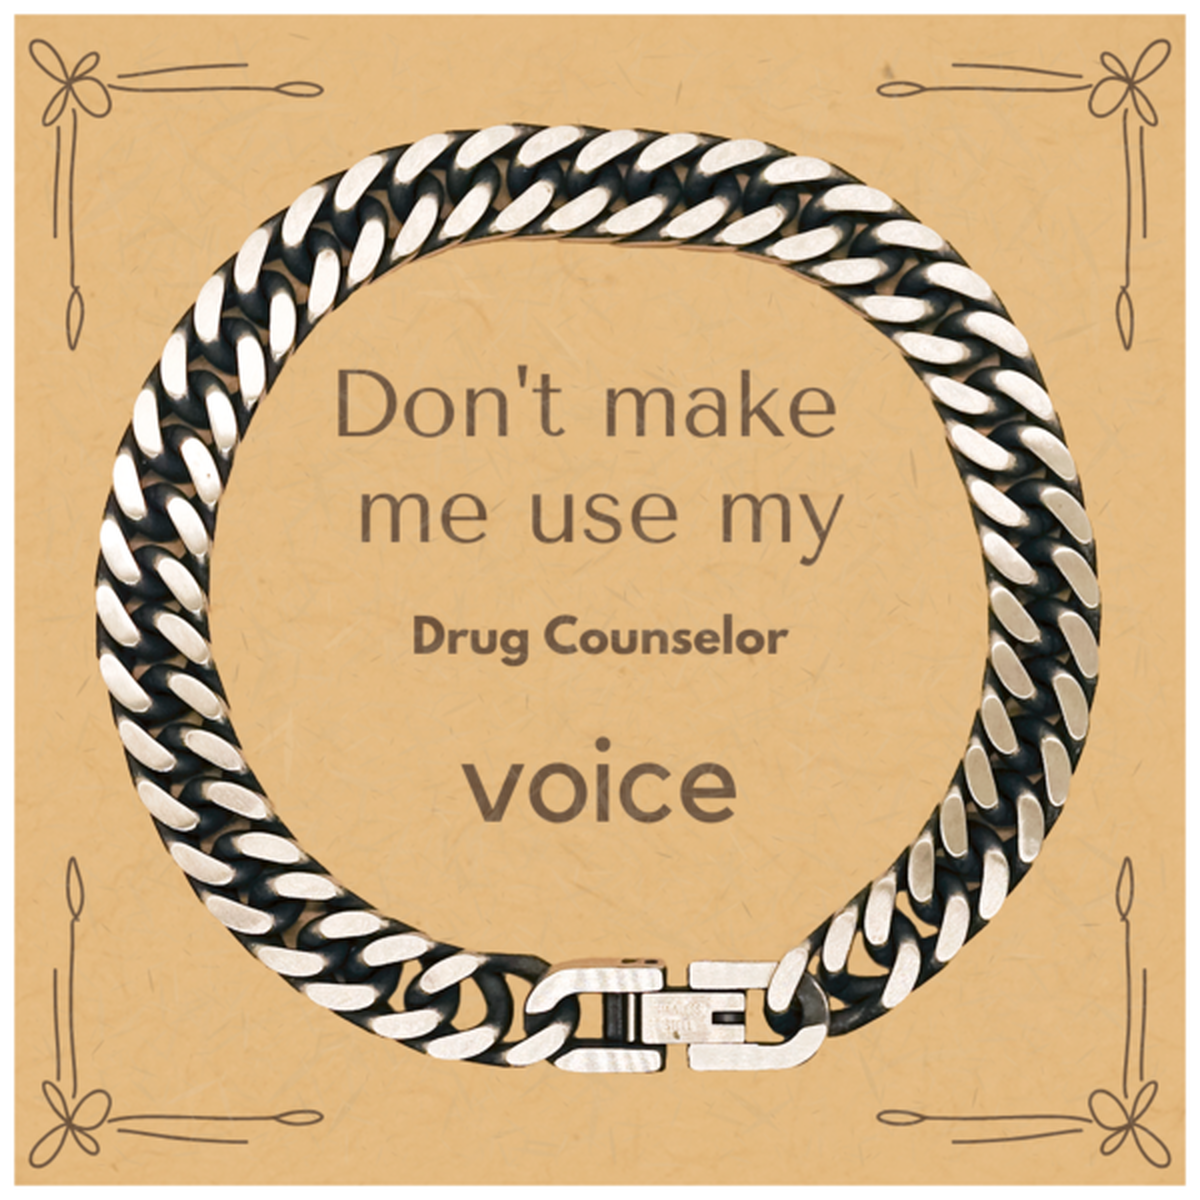 Don't make me use my Drug Counselor voice, Sarcasm Drug Counselor Card Gifts, Christmas Drug Counselor Cuban Link Chain Bracelet Birthday Unique Gifts For Drug Counselor Coworkers, Men, Women, Colleague, Friends